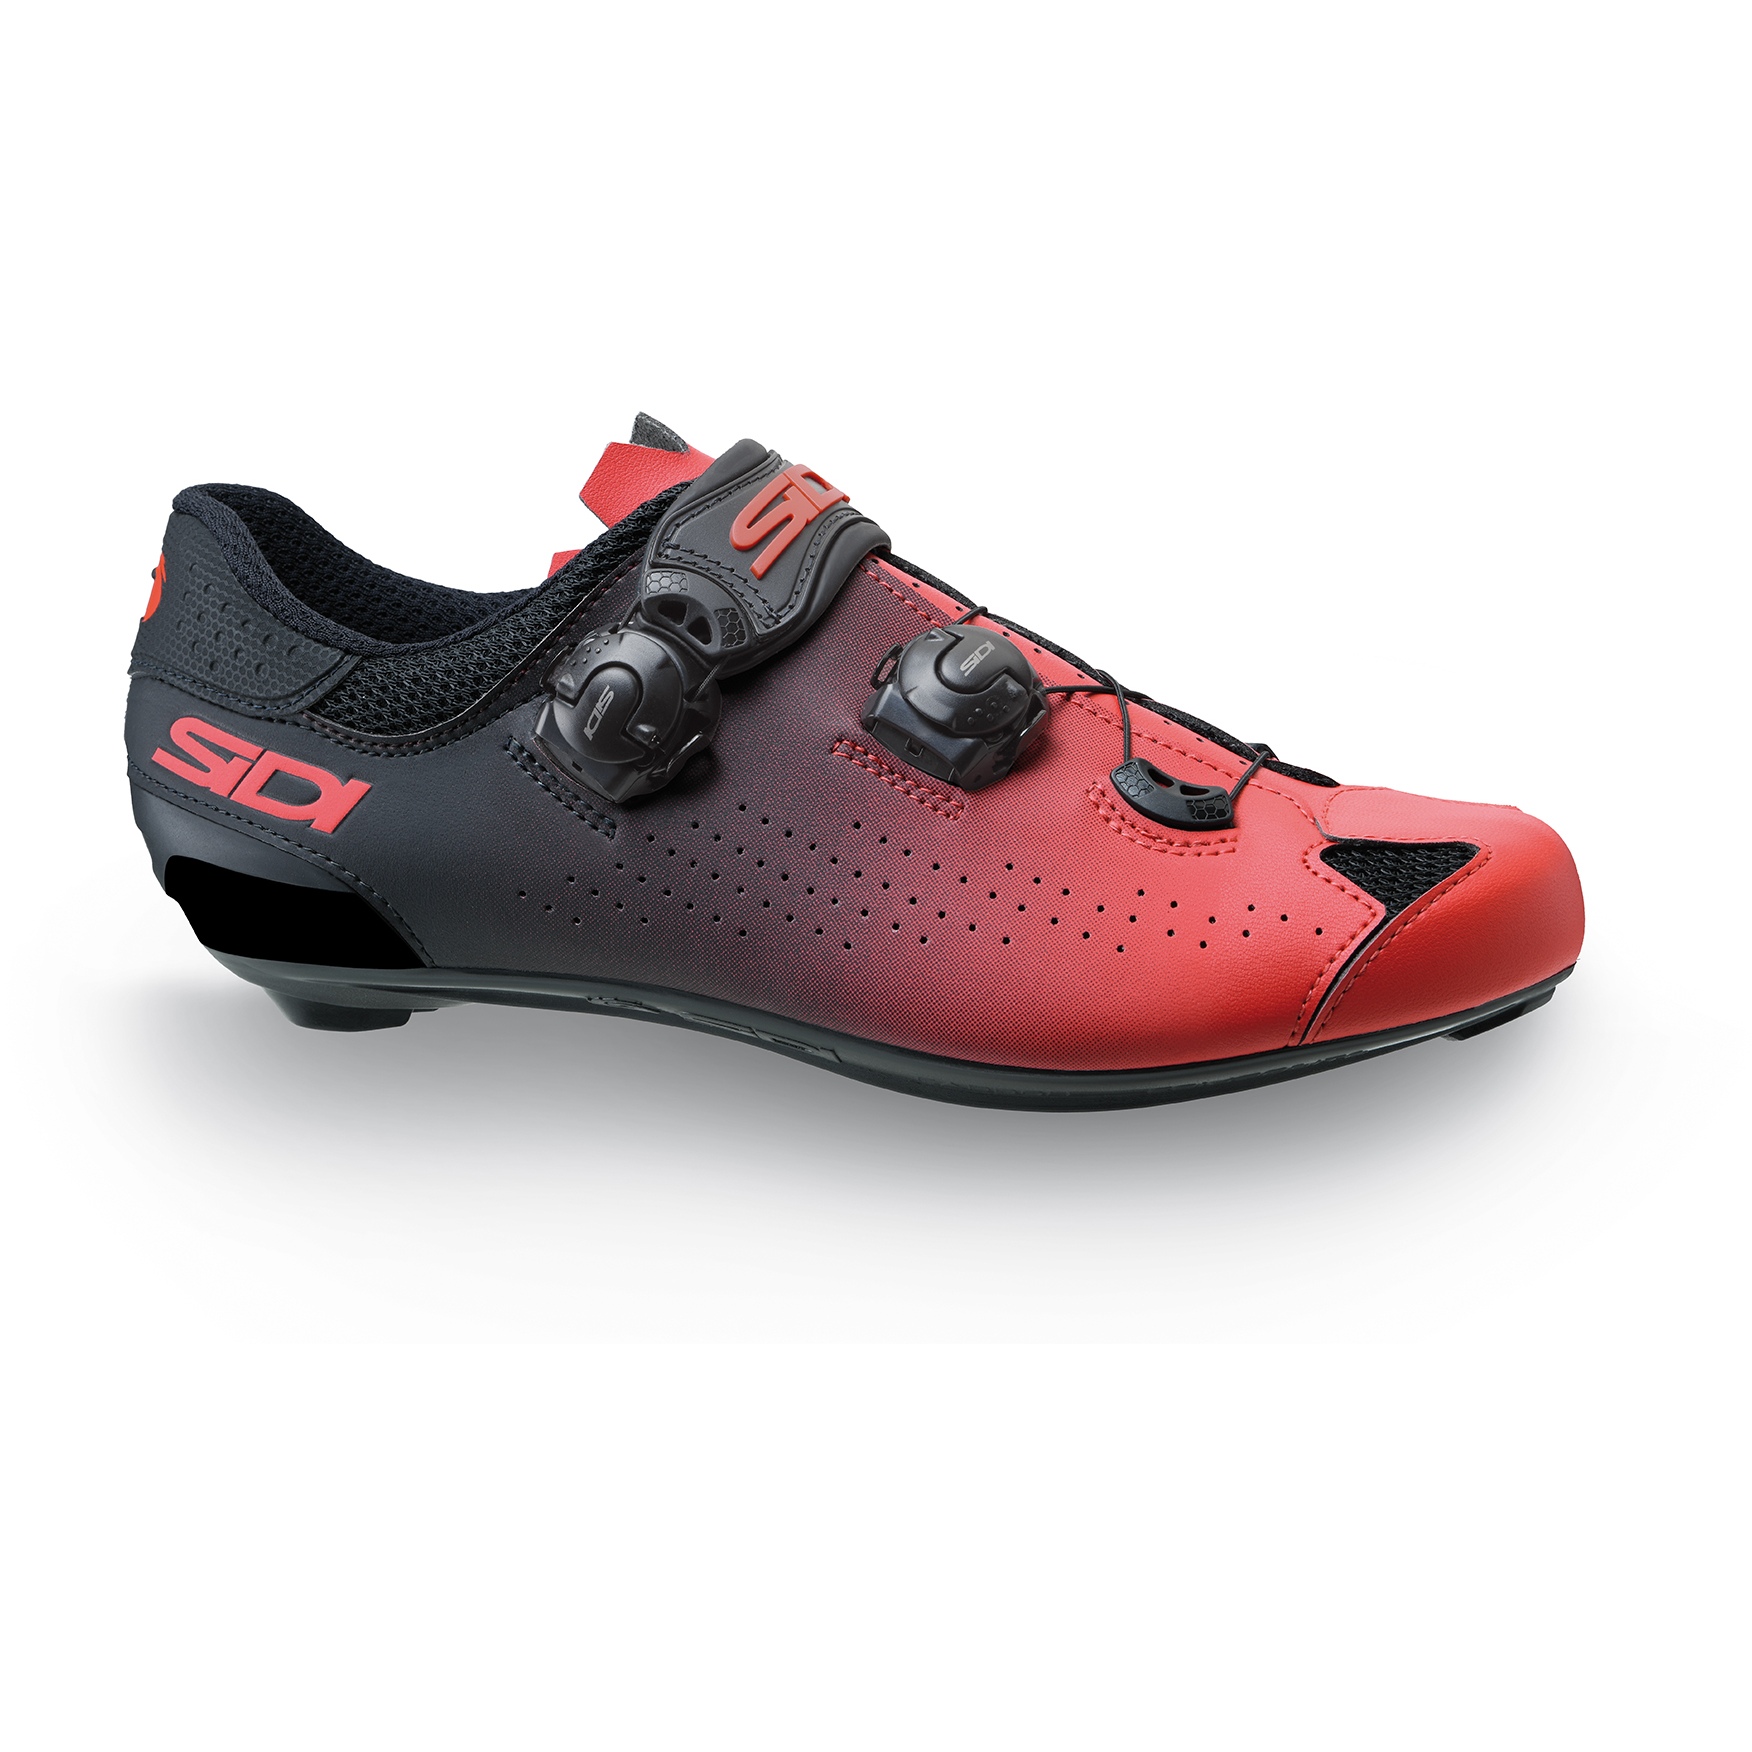 Picture of Sidi Genius 10 Road Shoes - Red/Black